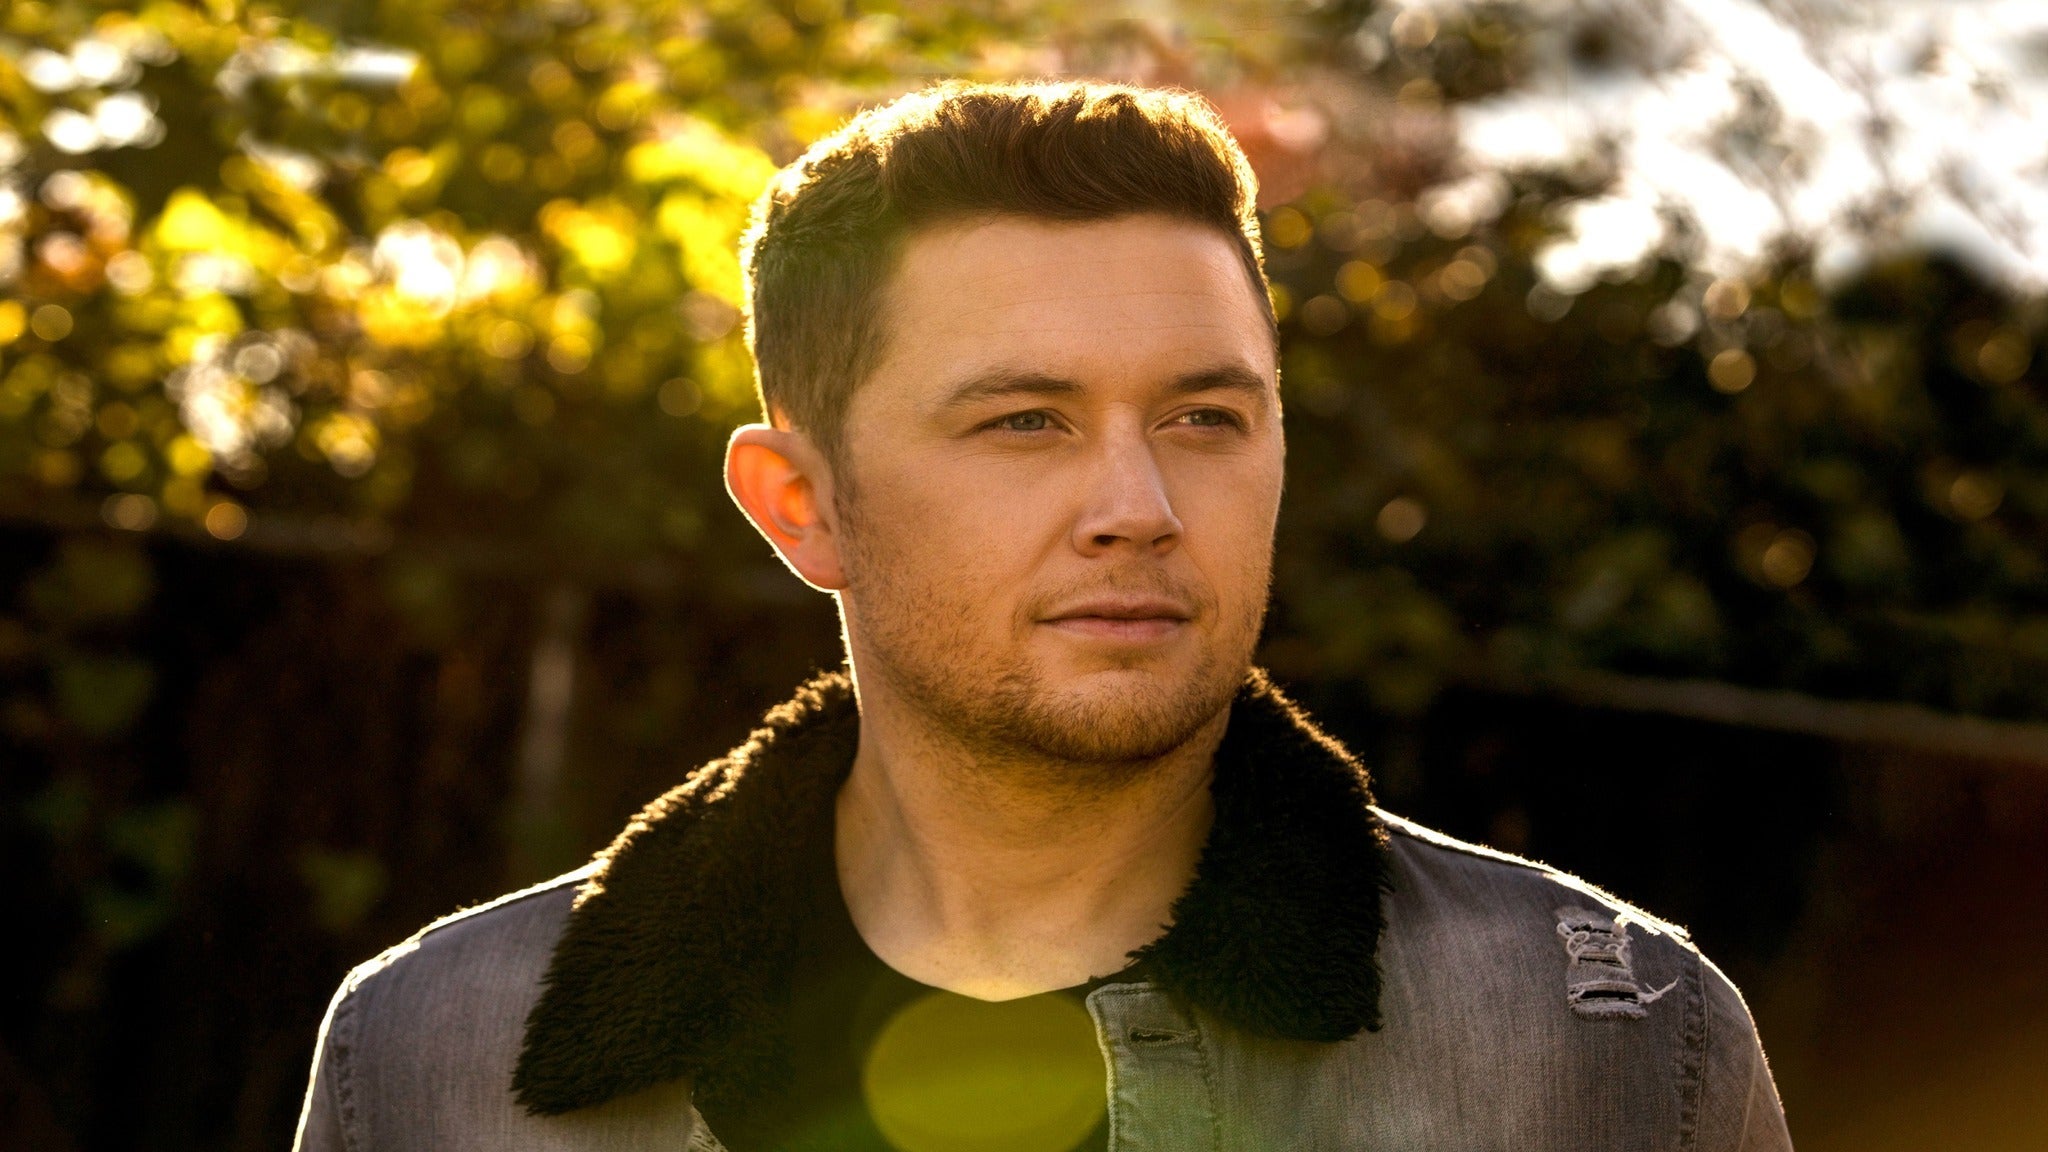 Scotty McCreery at Chandler Center for the Arts - Chandler, AZ 85224